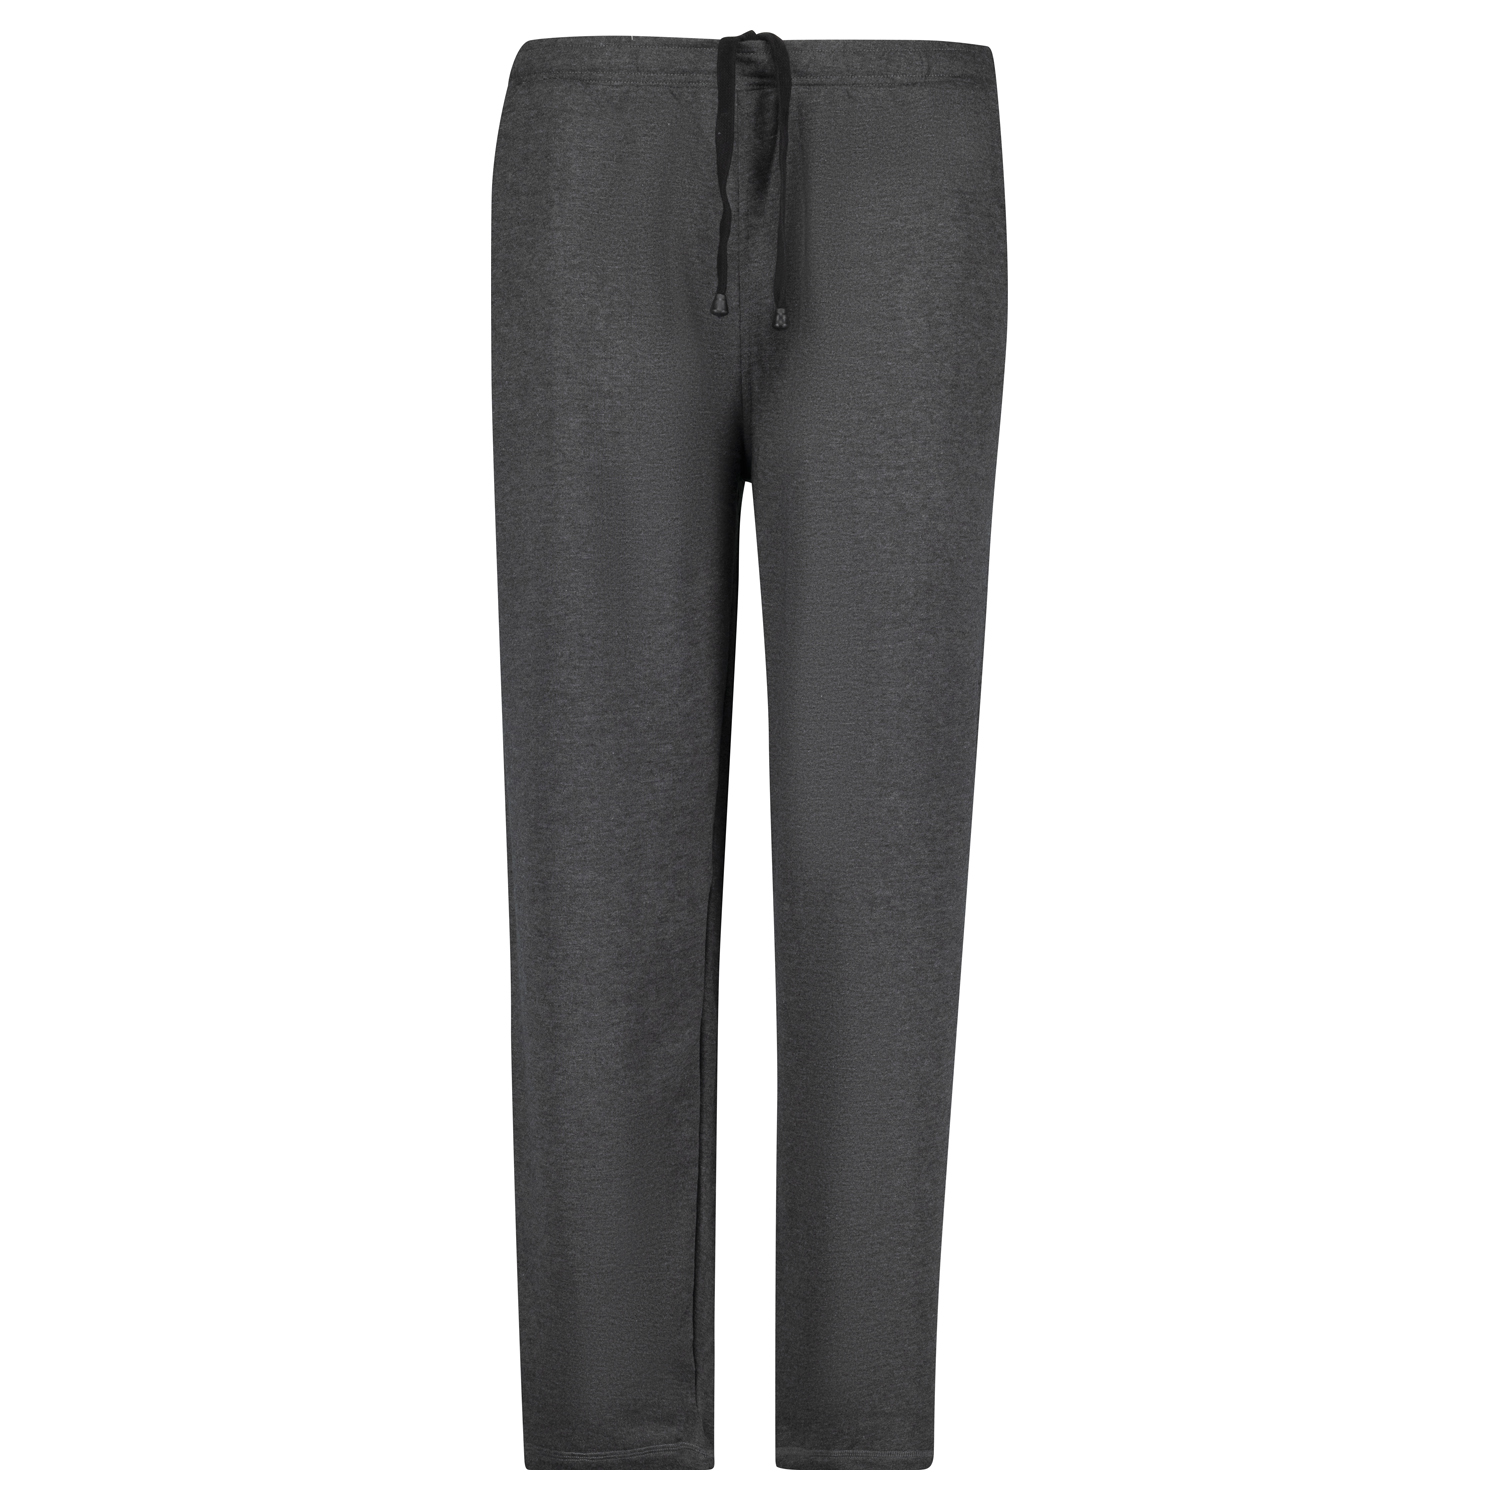 Anthracite mottled sweat pants for men by Adamo series Athen in plus sizes up to 14XL//122